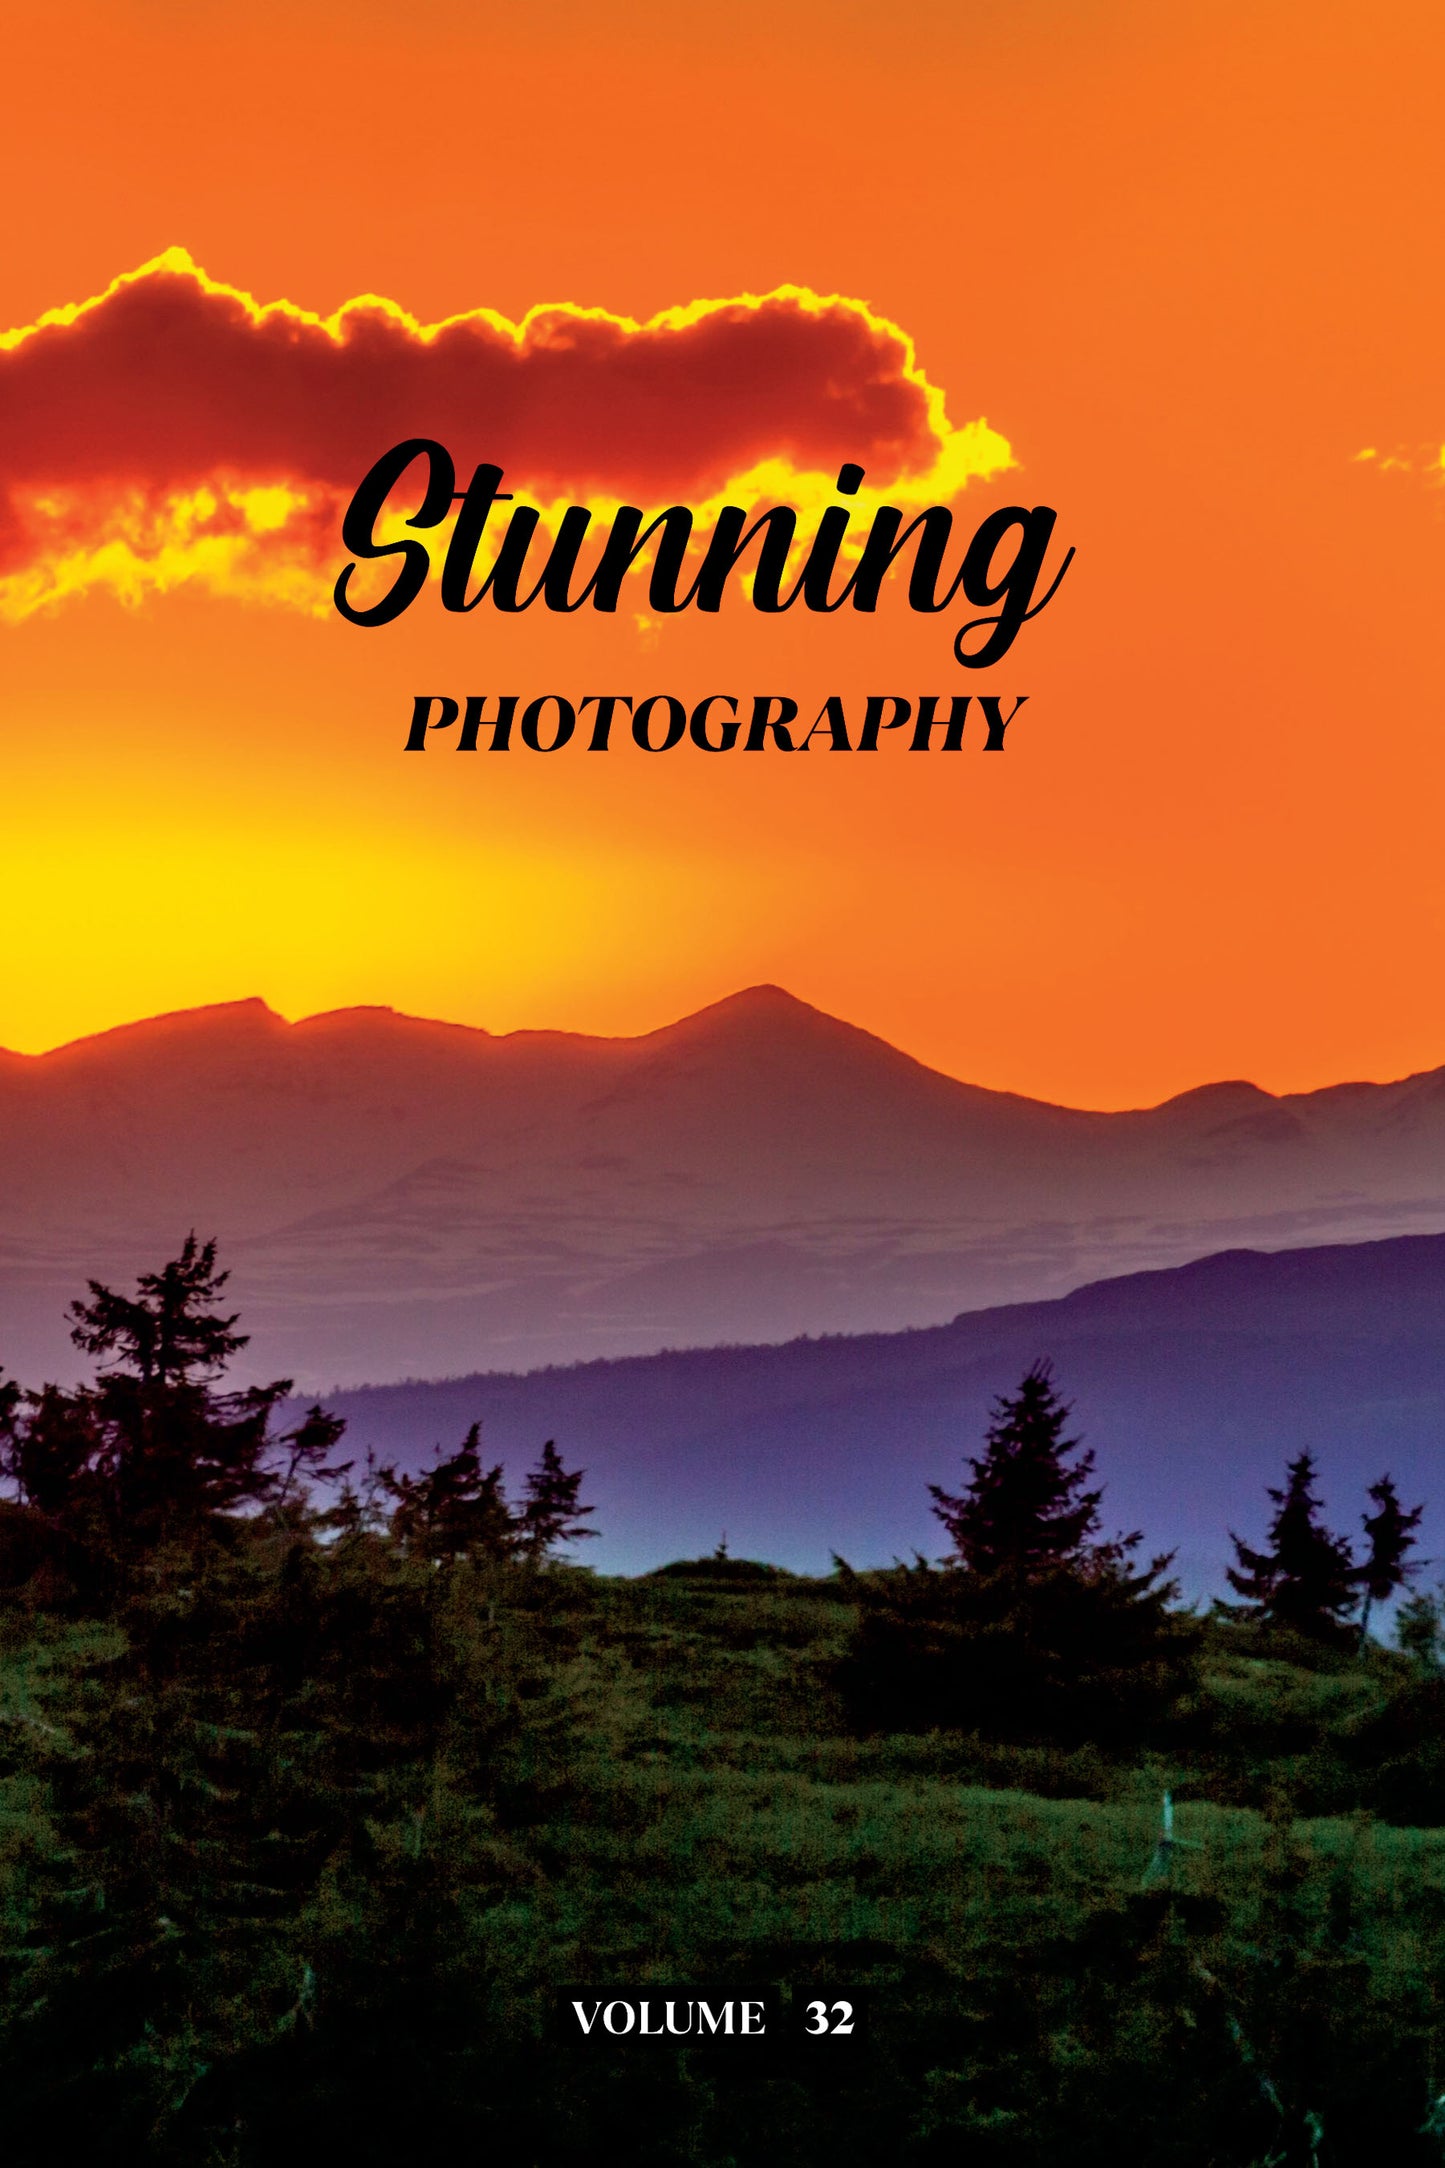 Stunning Photography Volume 32 (Physical Book Pre-Order)